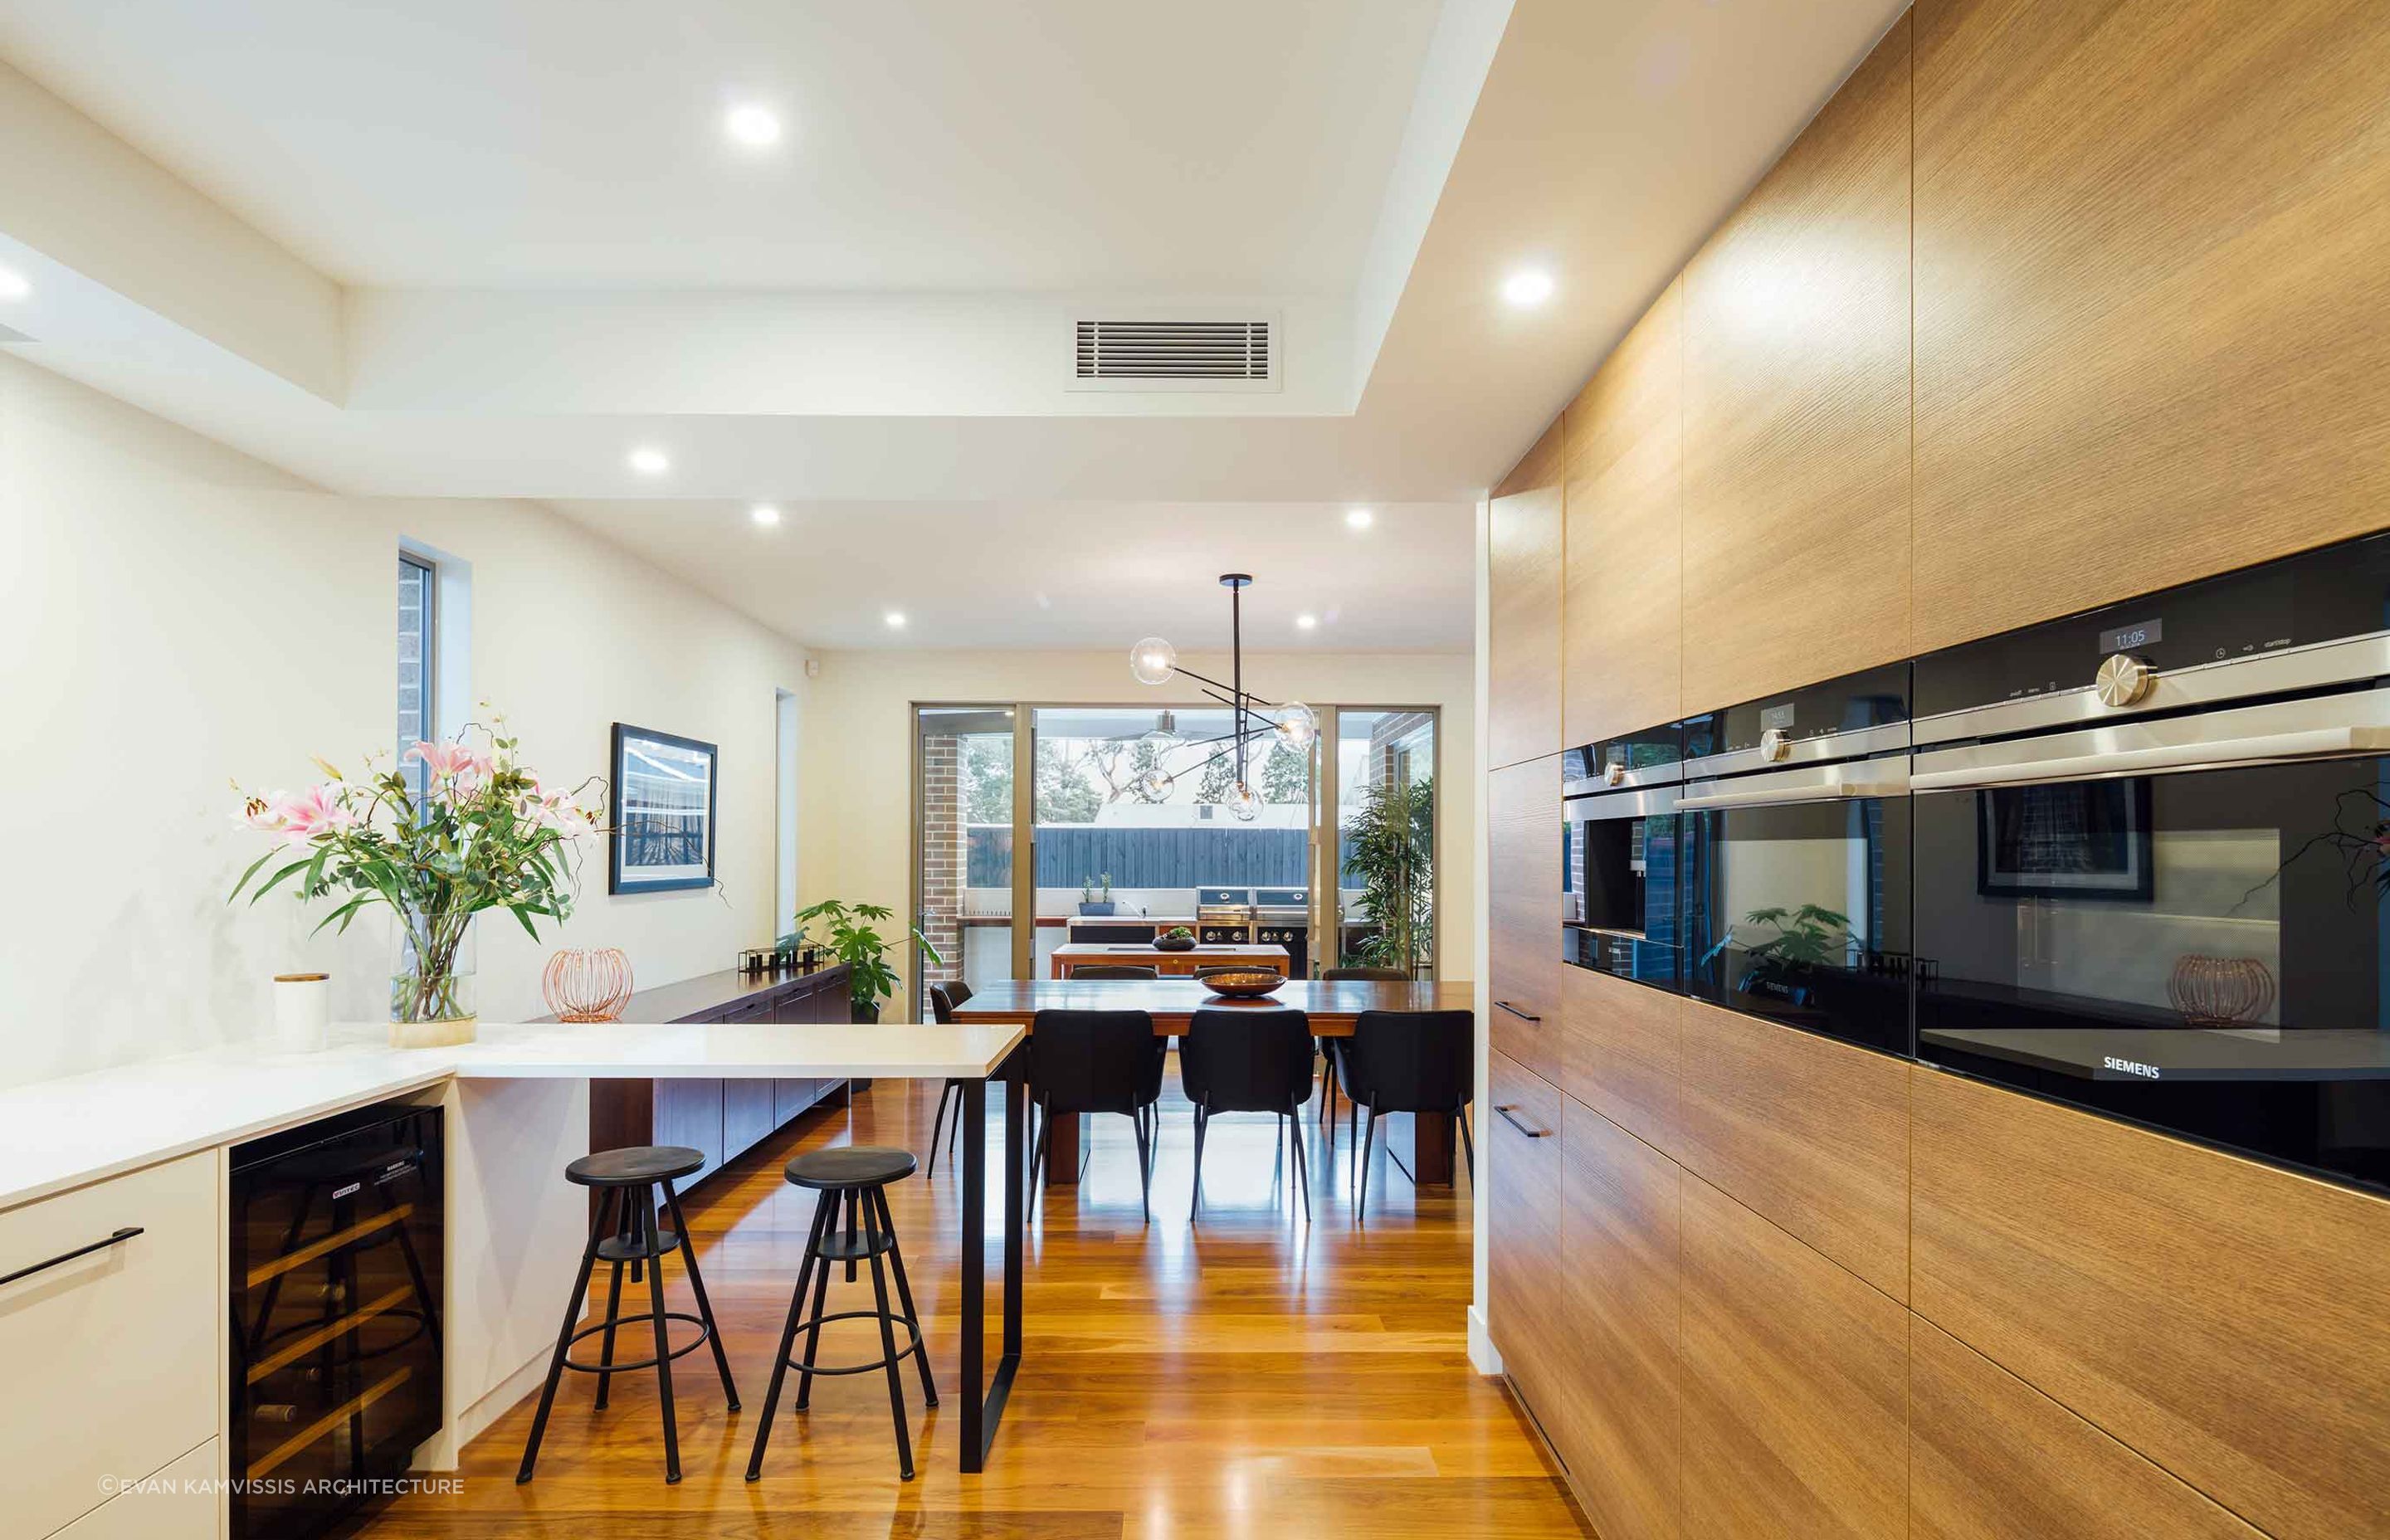 An abundance of space and luxury, with concealed appliances, integrated joinery and more in this sophisticated contemporary home on Omar Street - Photography: Michael Kai